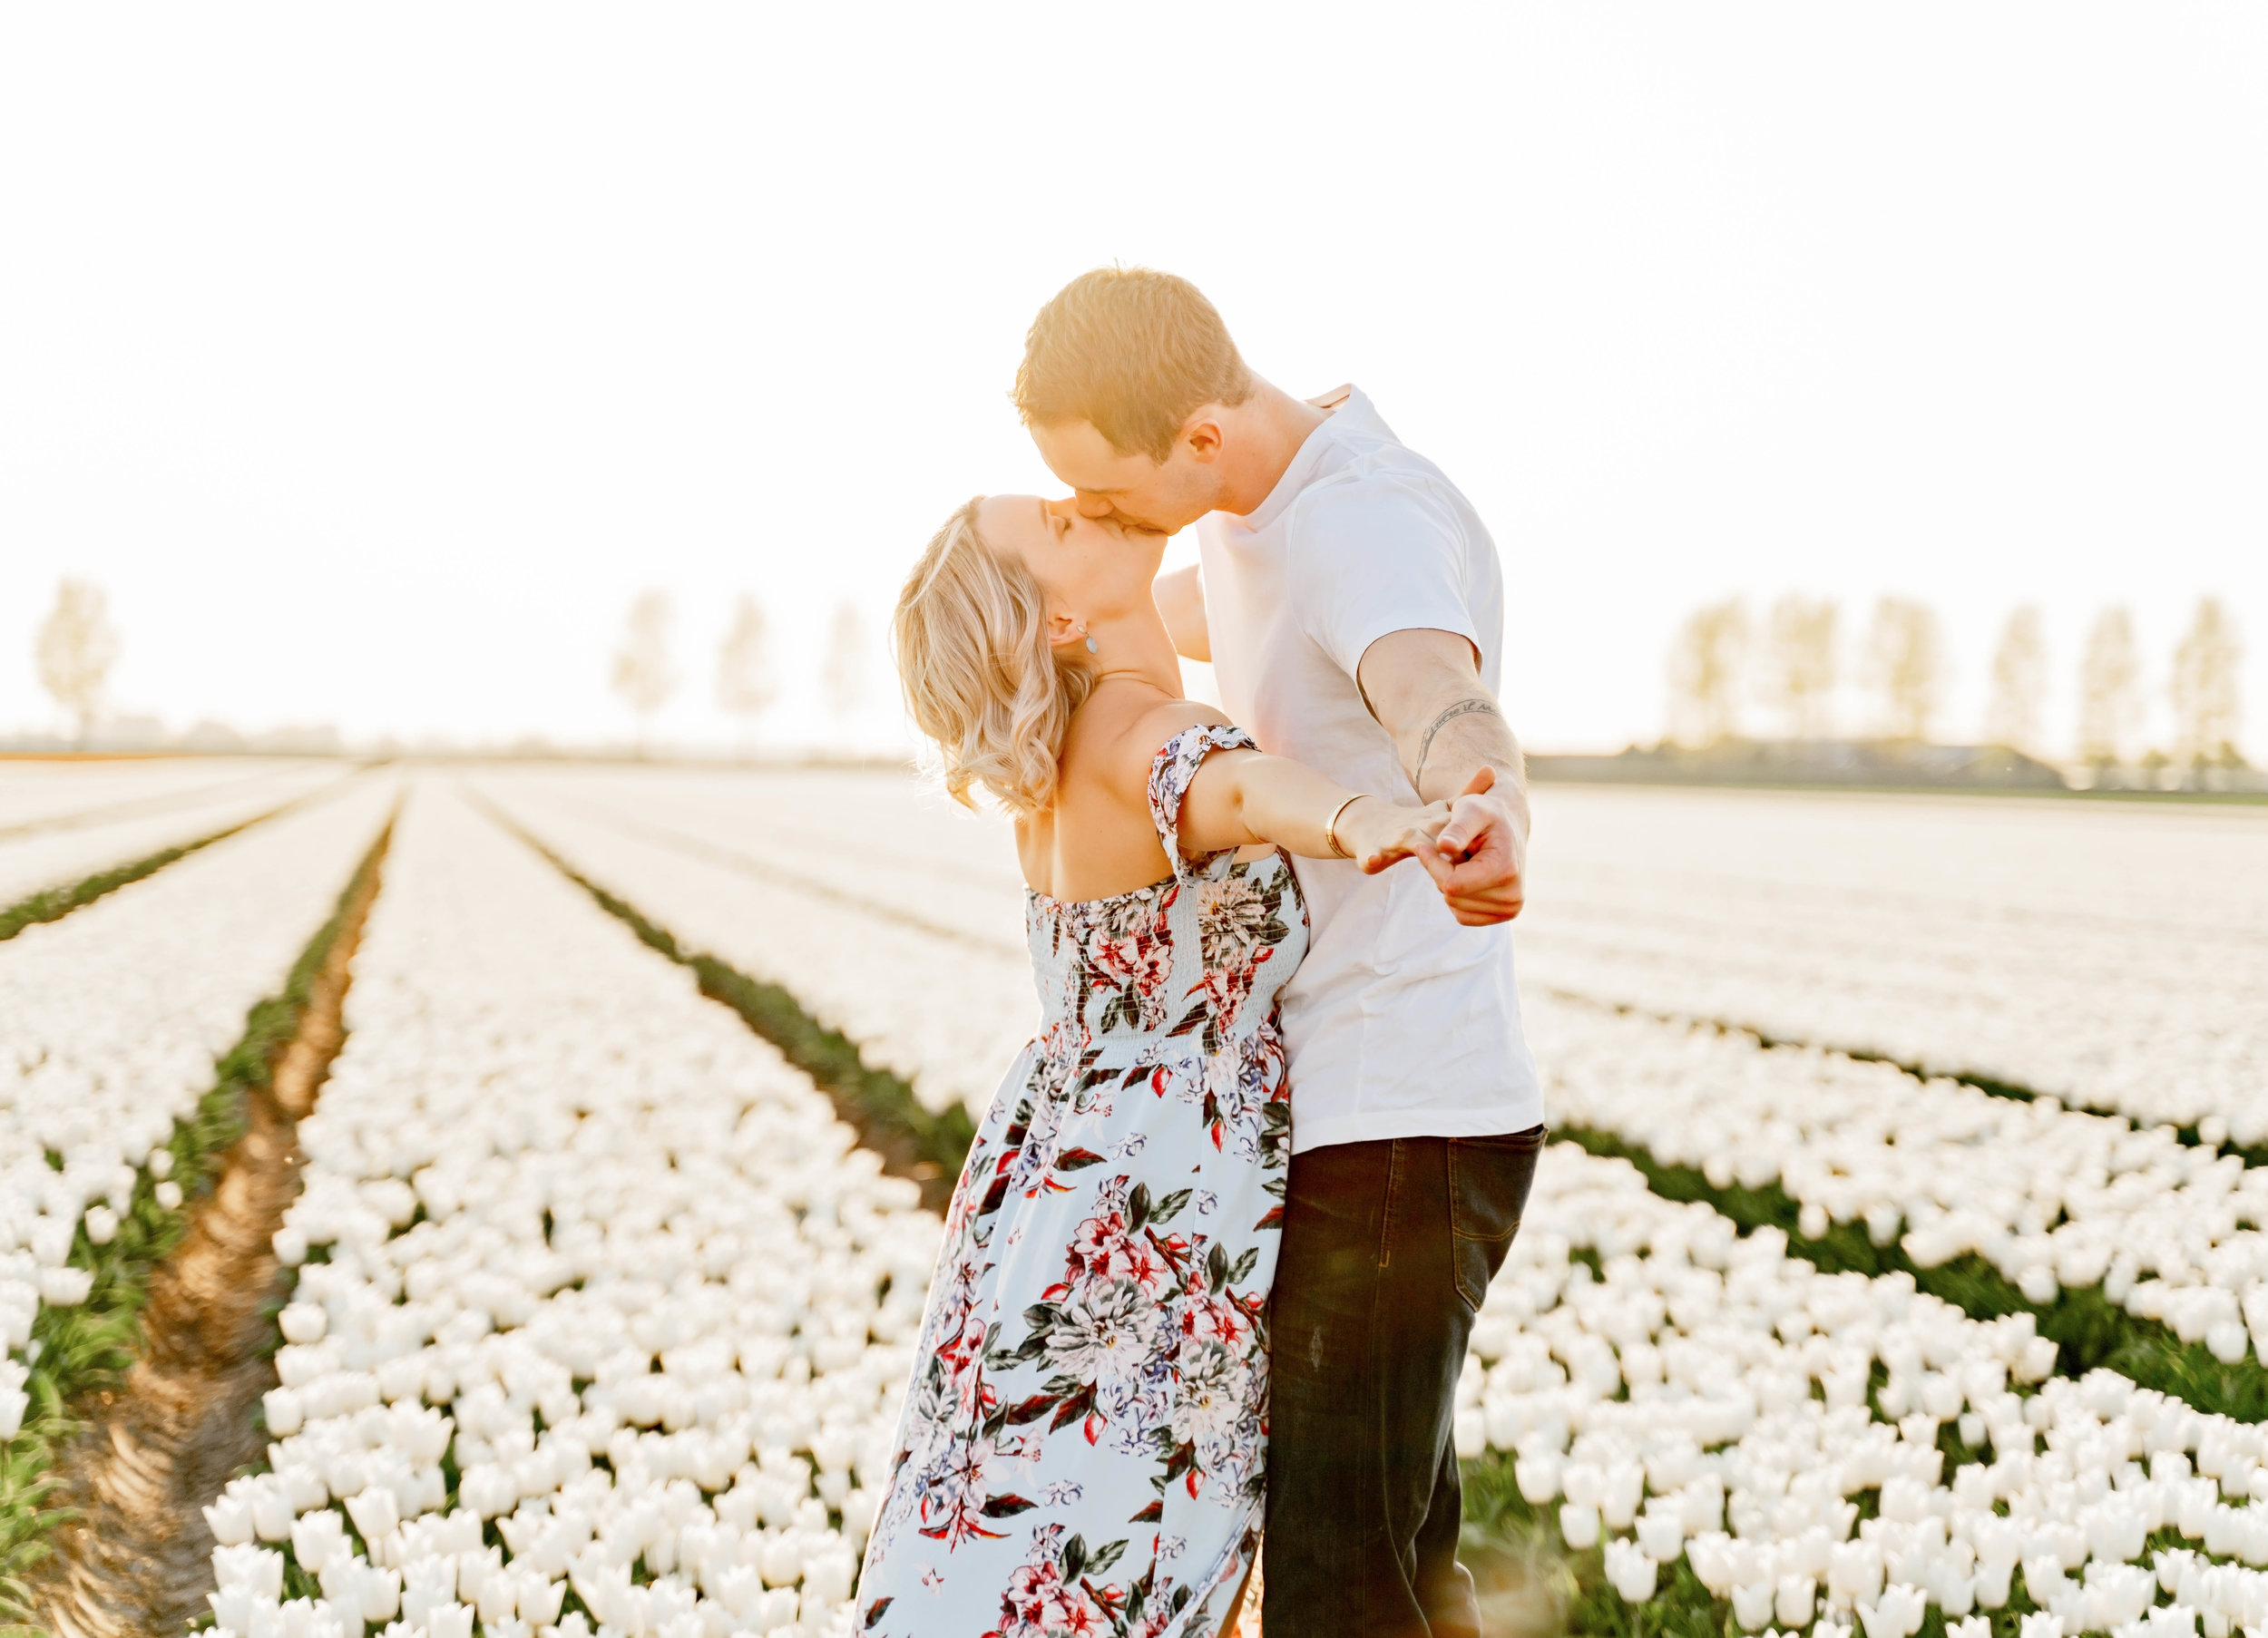  engagement session having a destination foto shoot with a couple in the Netherlands in the tulip fields by kmc photographer sarah havens 